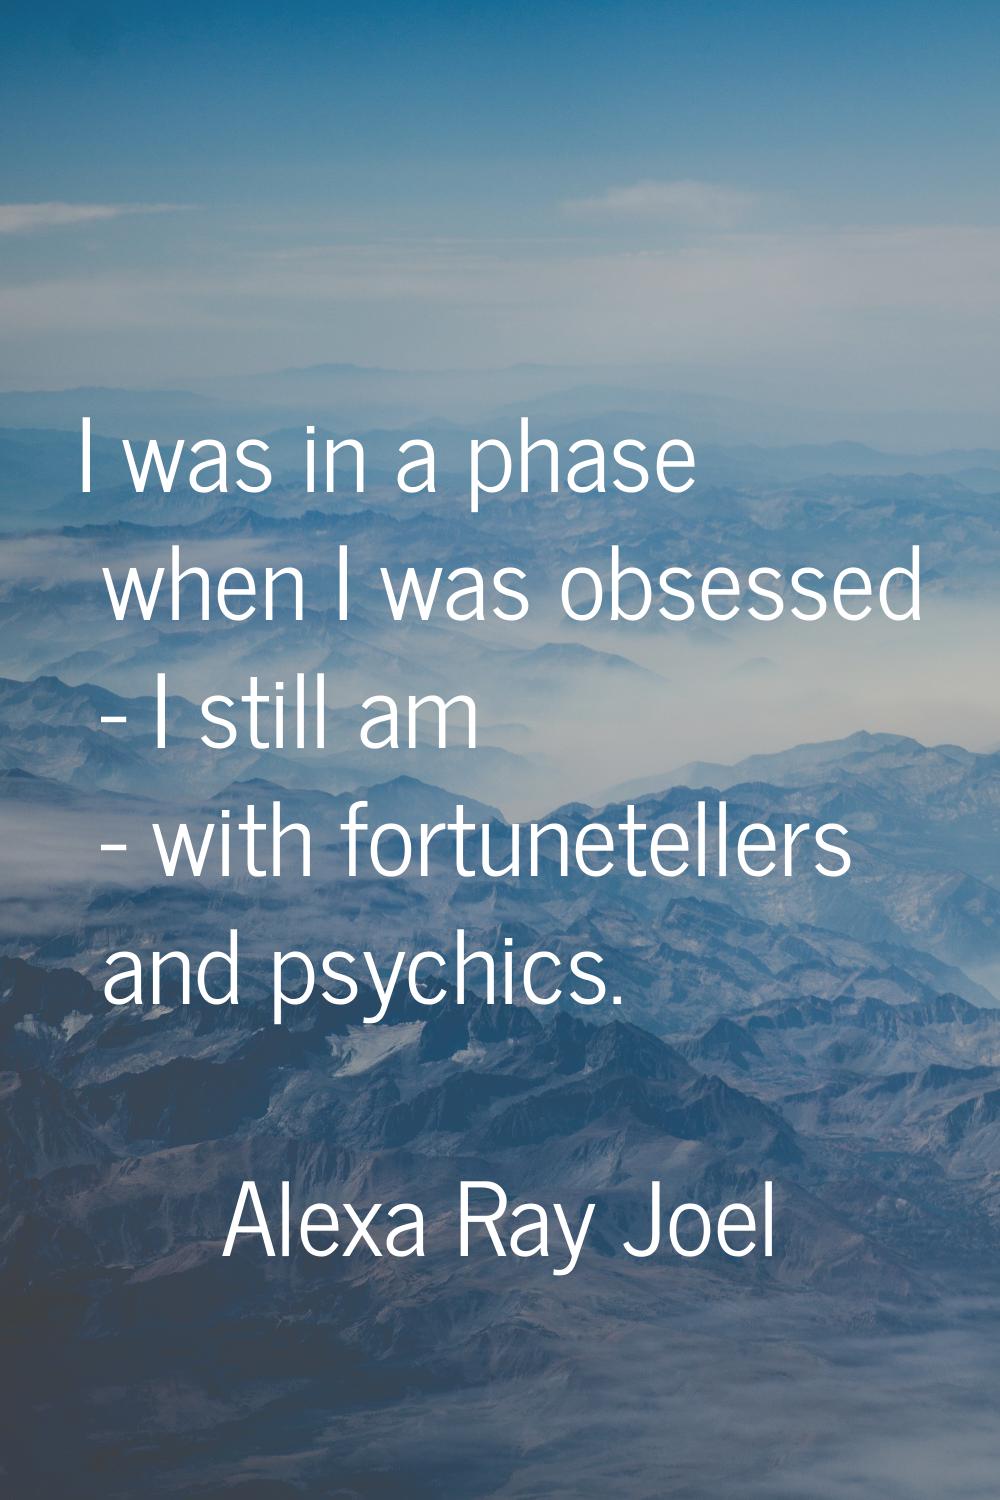 I was in a phase when I was obsessed - I still am - with fortunetellers and psychics.